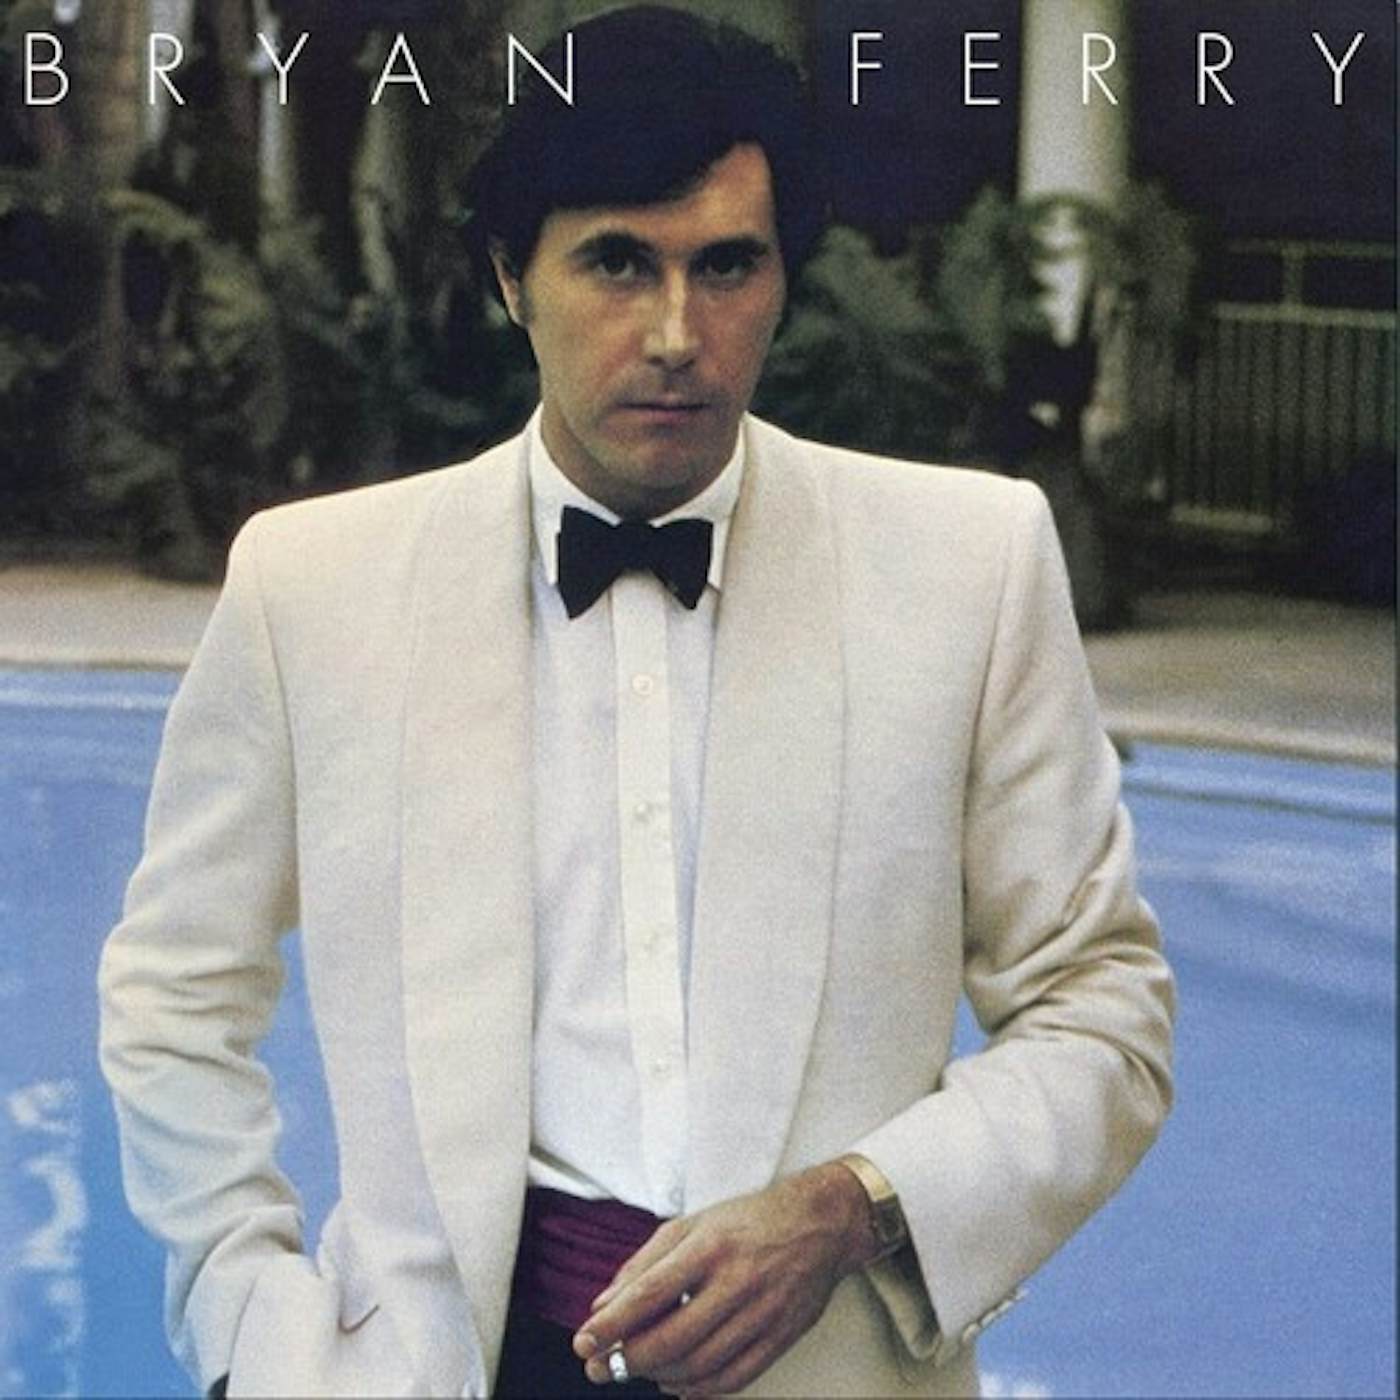 Bryan Ferry Another Time, Another Place Vinyl Record